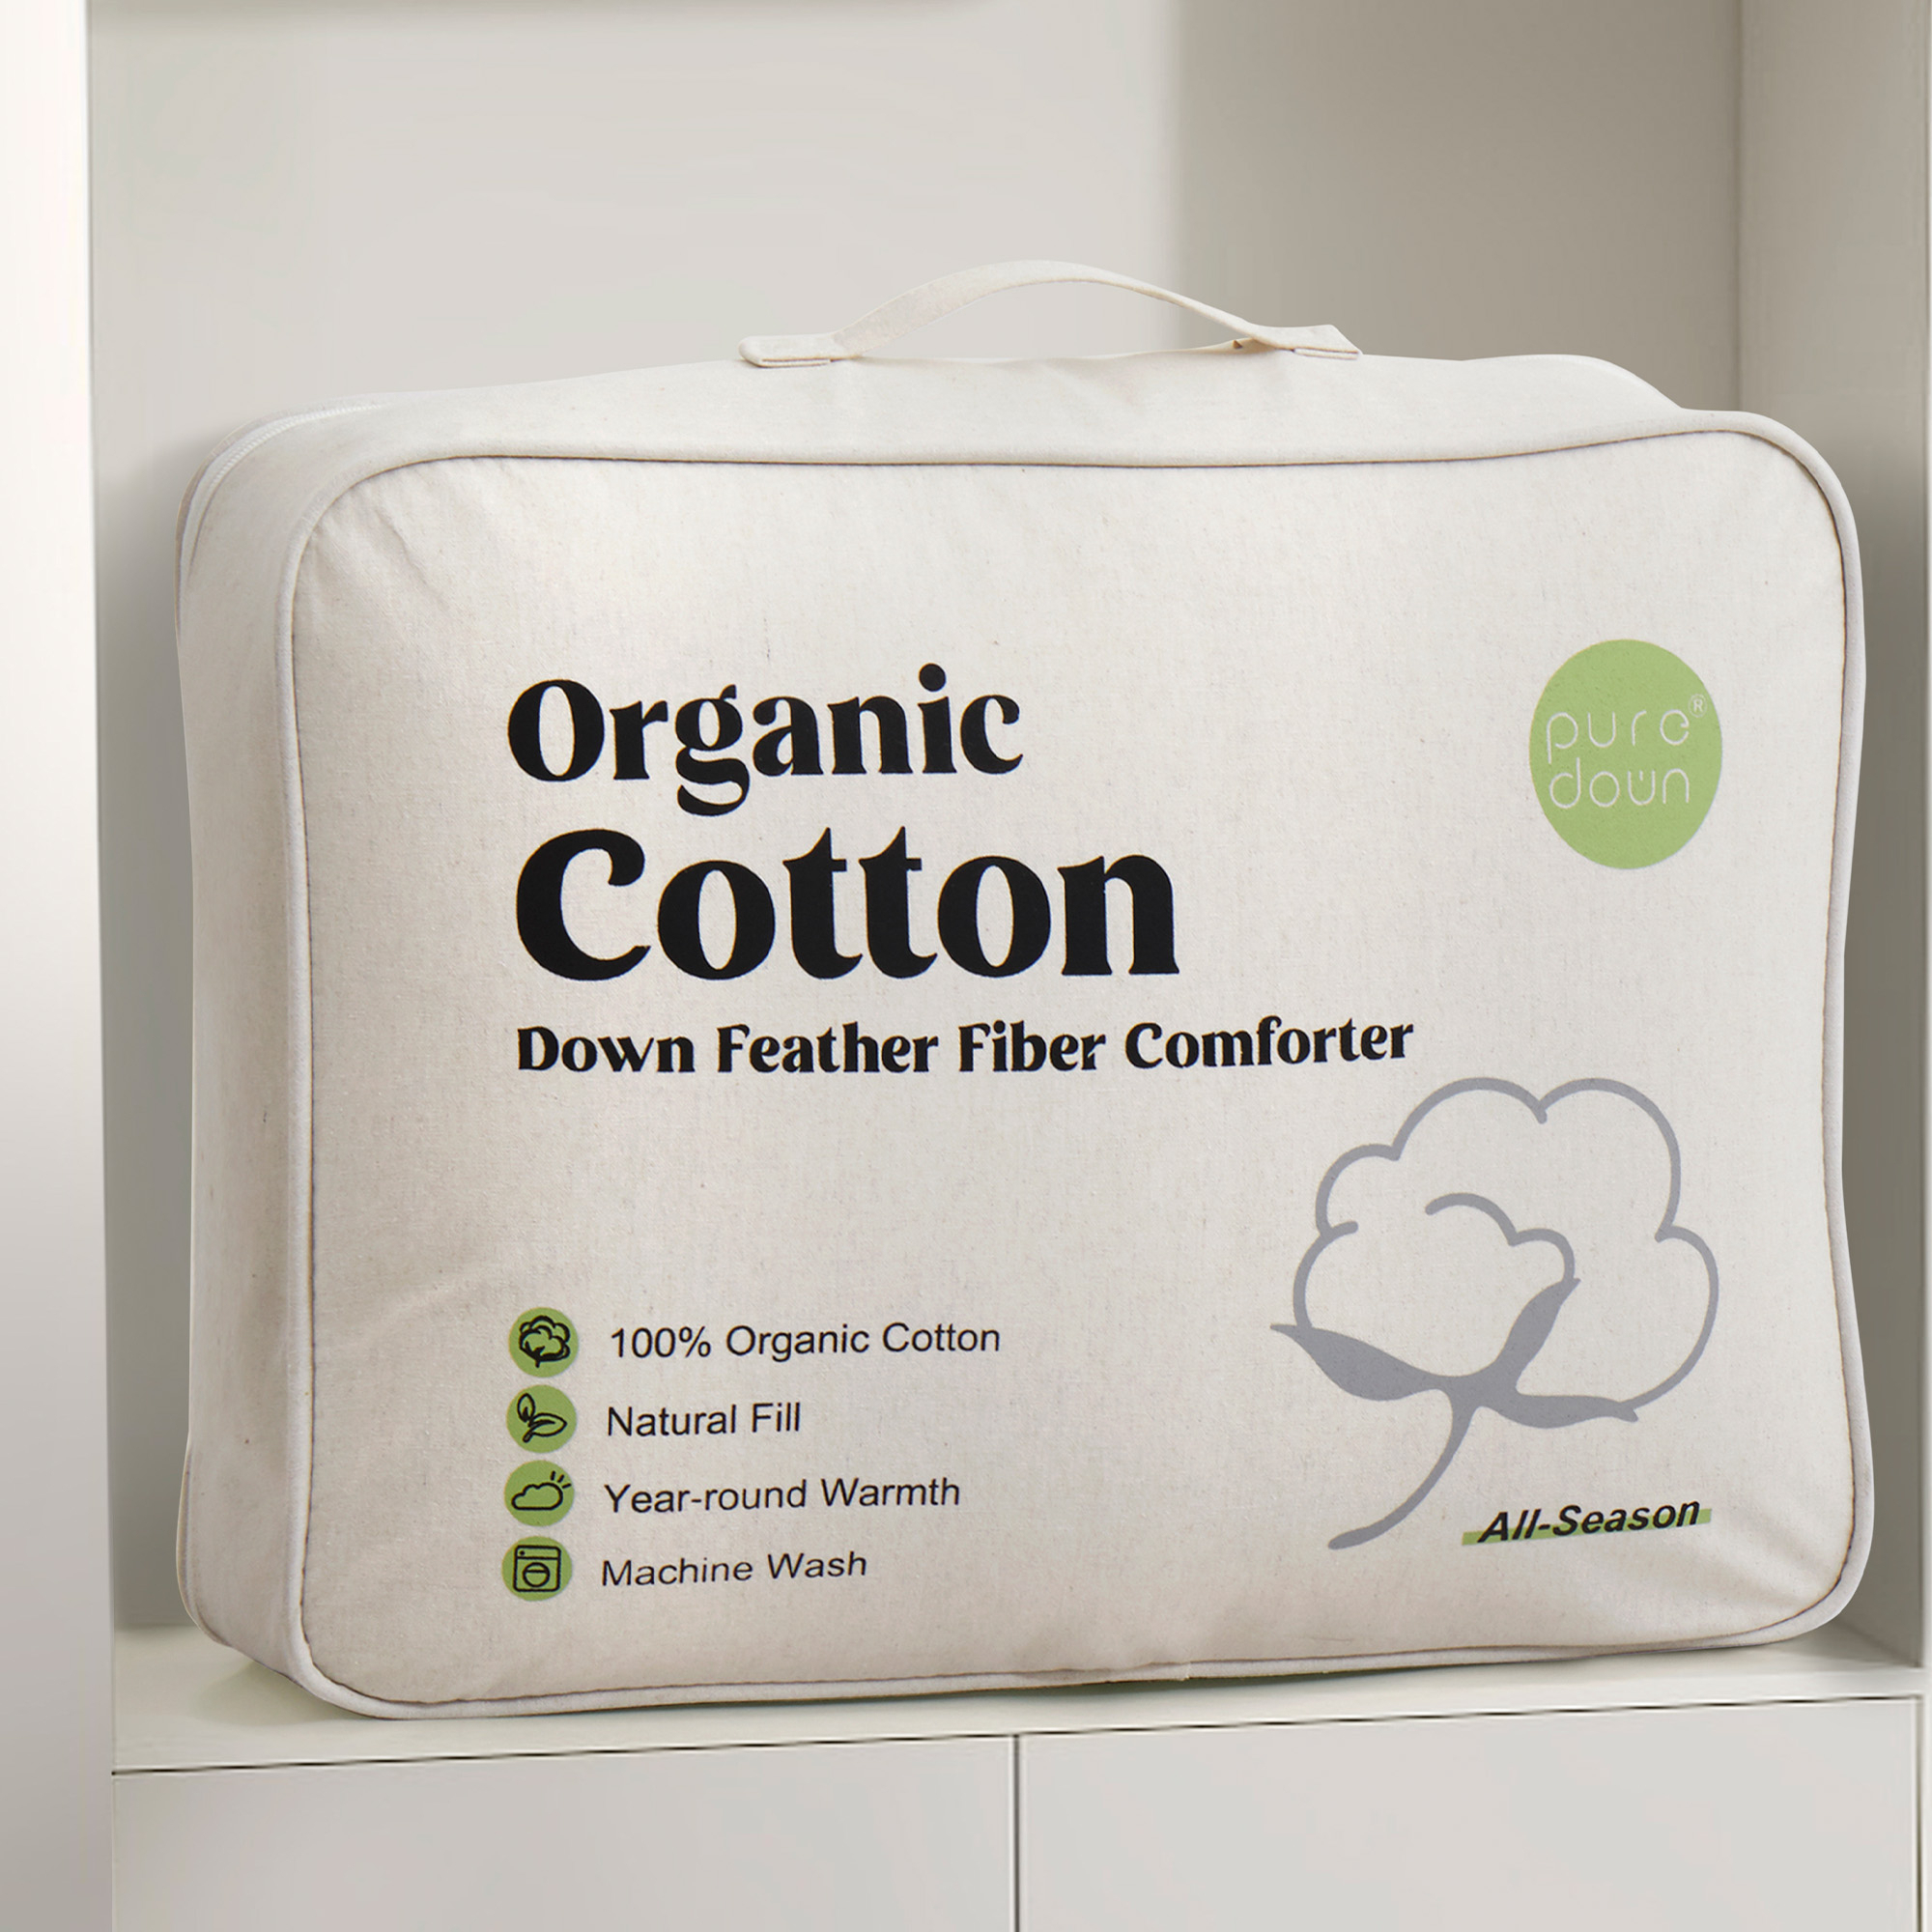 All Season Goose Down And Feather Fiber Comforter With Organic Cotton Fabric - Full/Queen